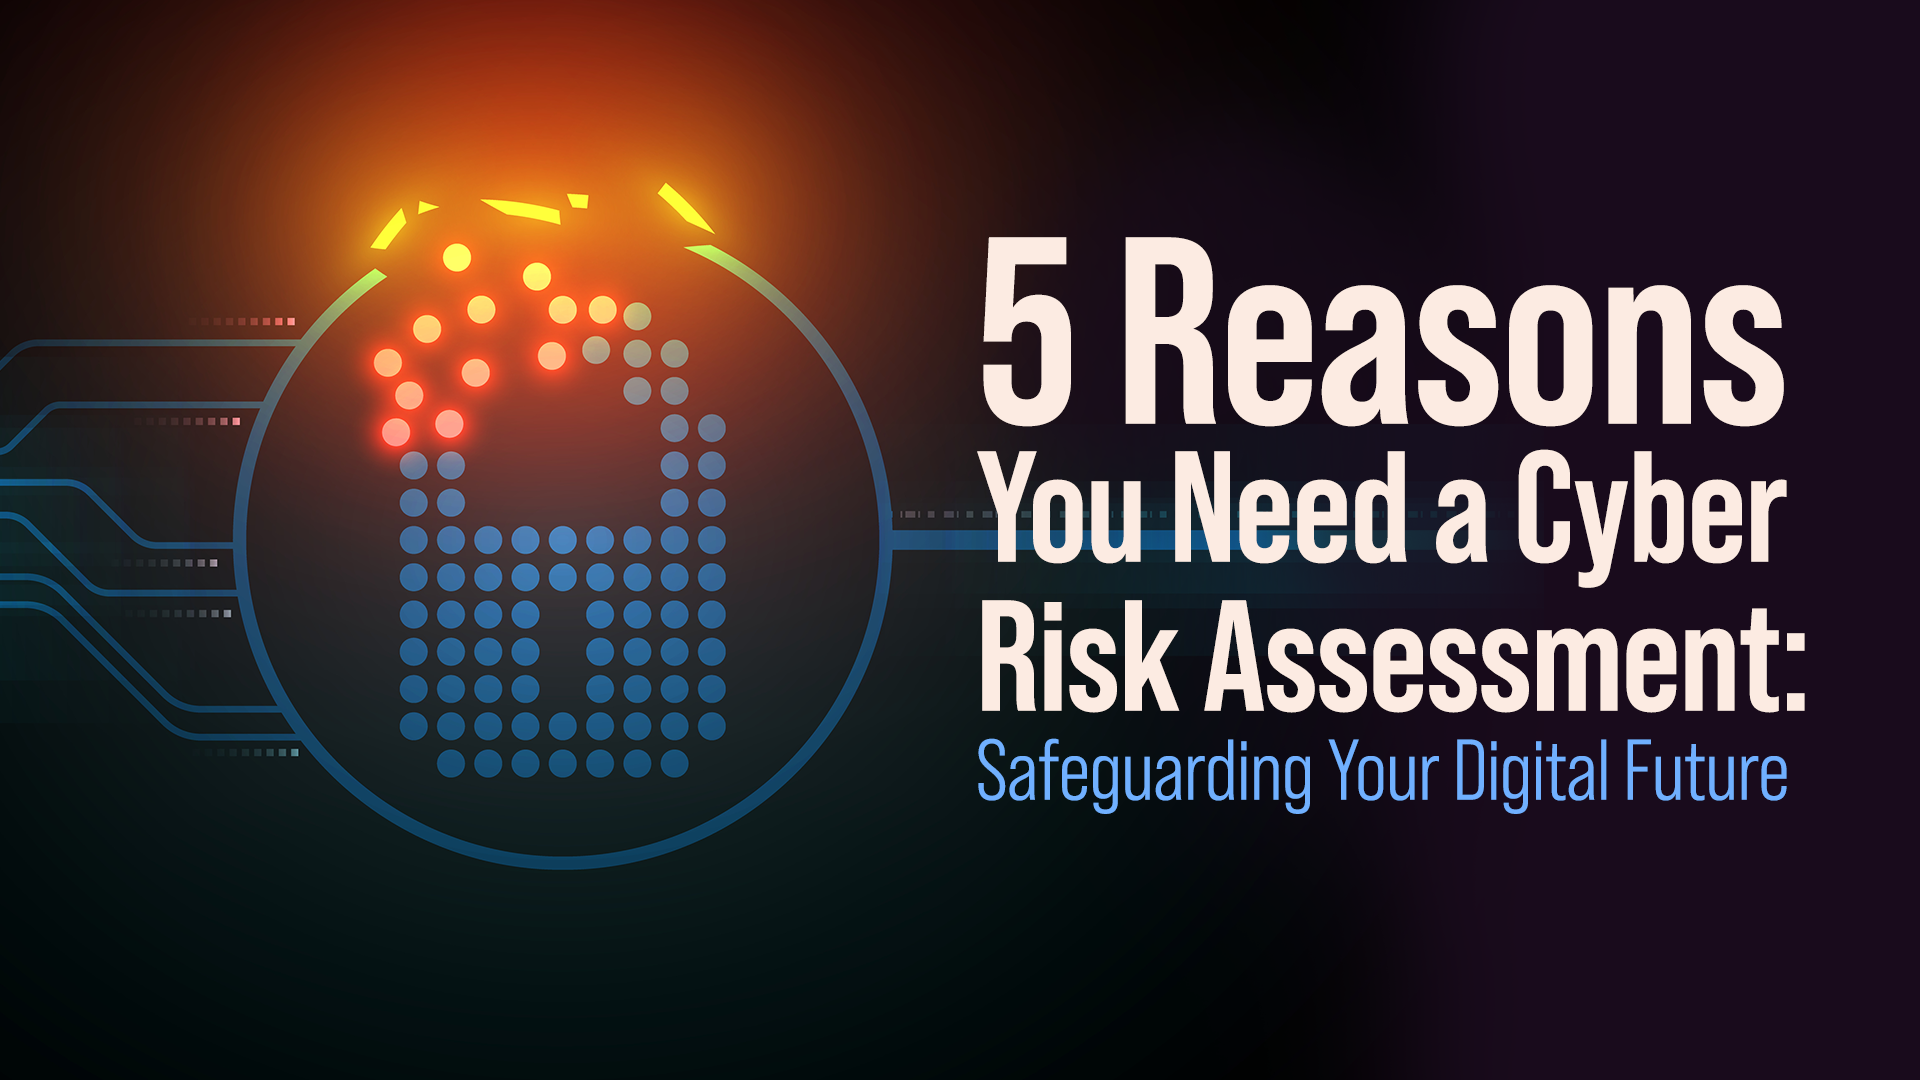 5 Reasons You Need a Cyber Risk Assessment: Safeguarding Your Digital Future